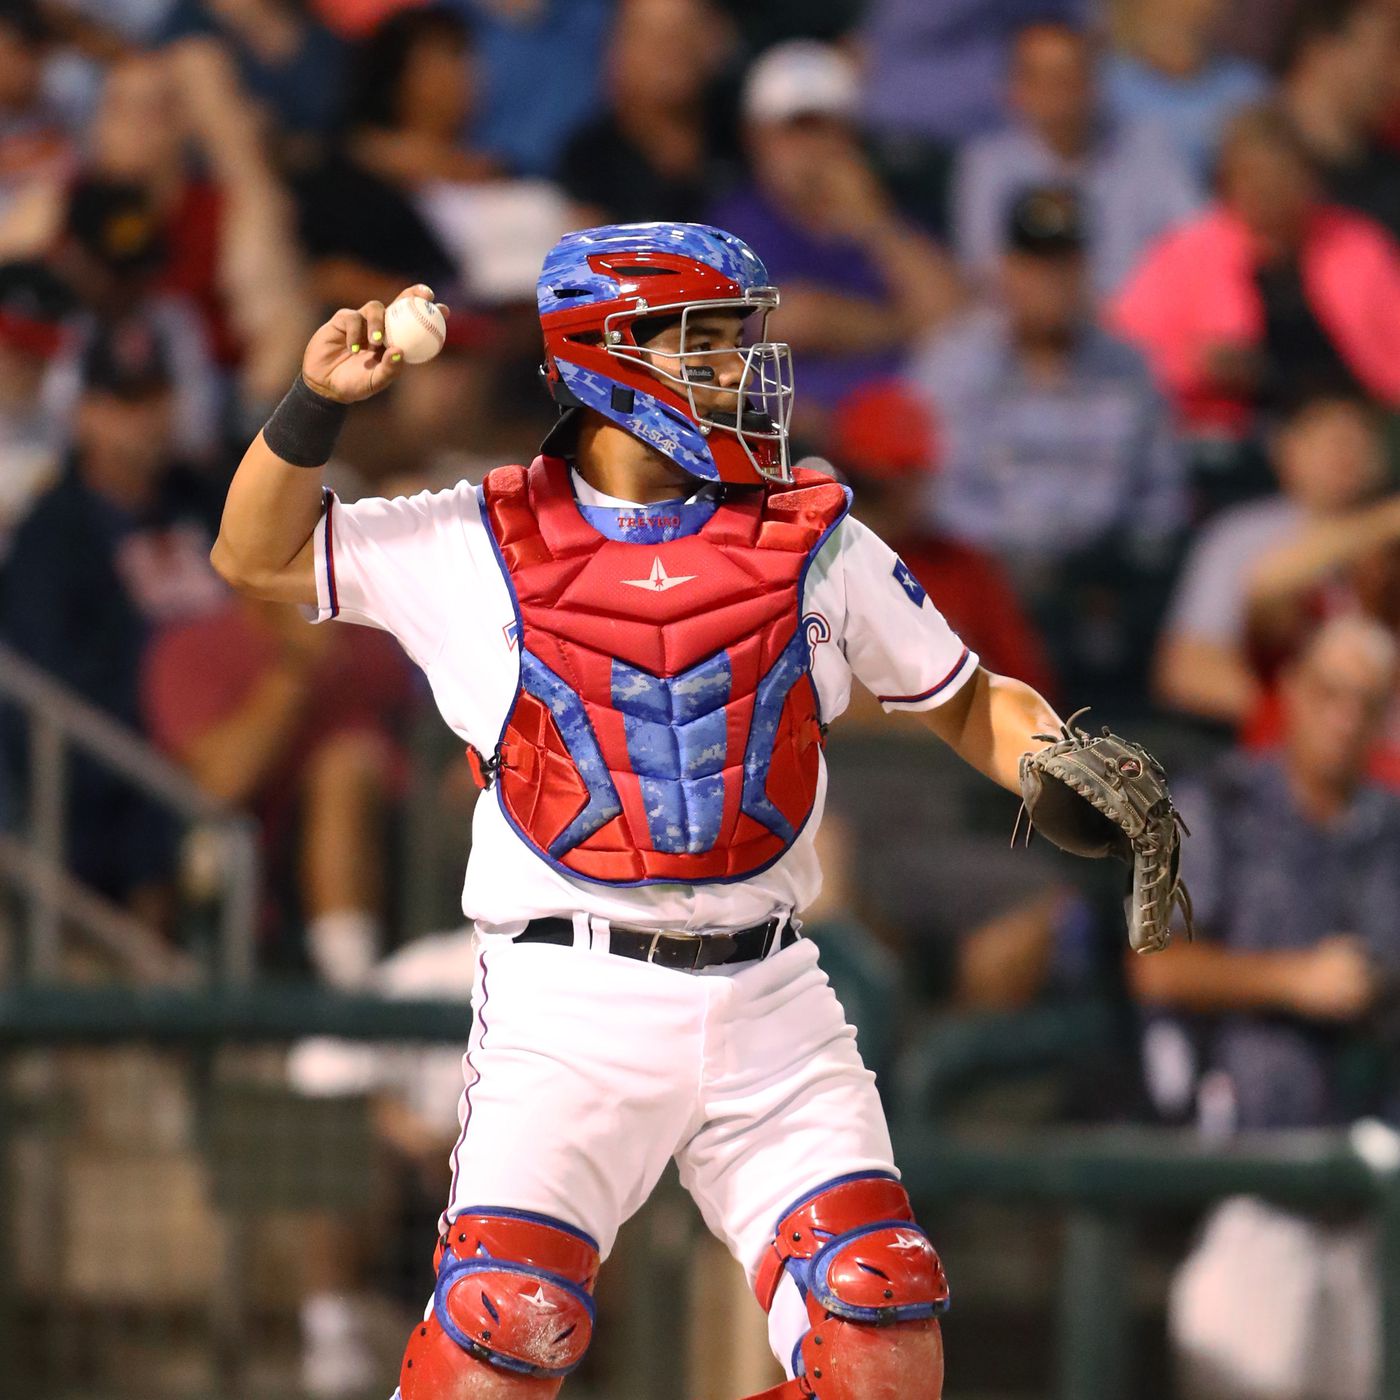 Pay attention to Rangers catching prospect Jose Trevino - Minor